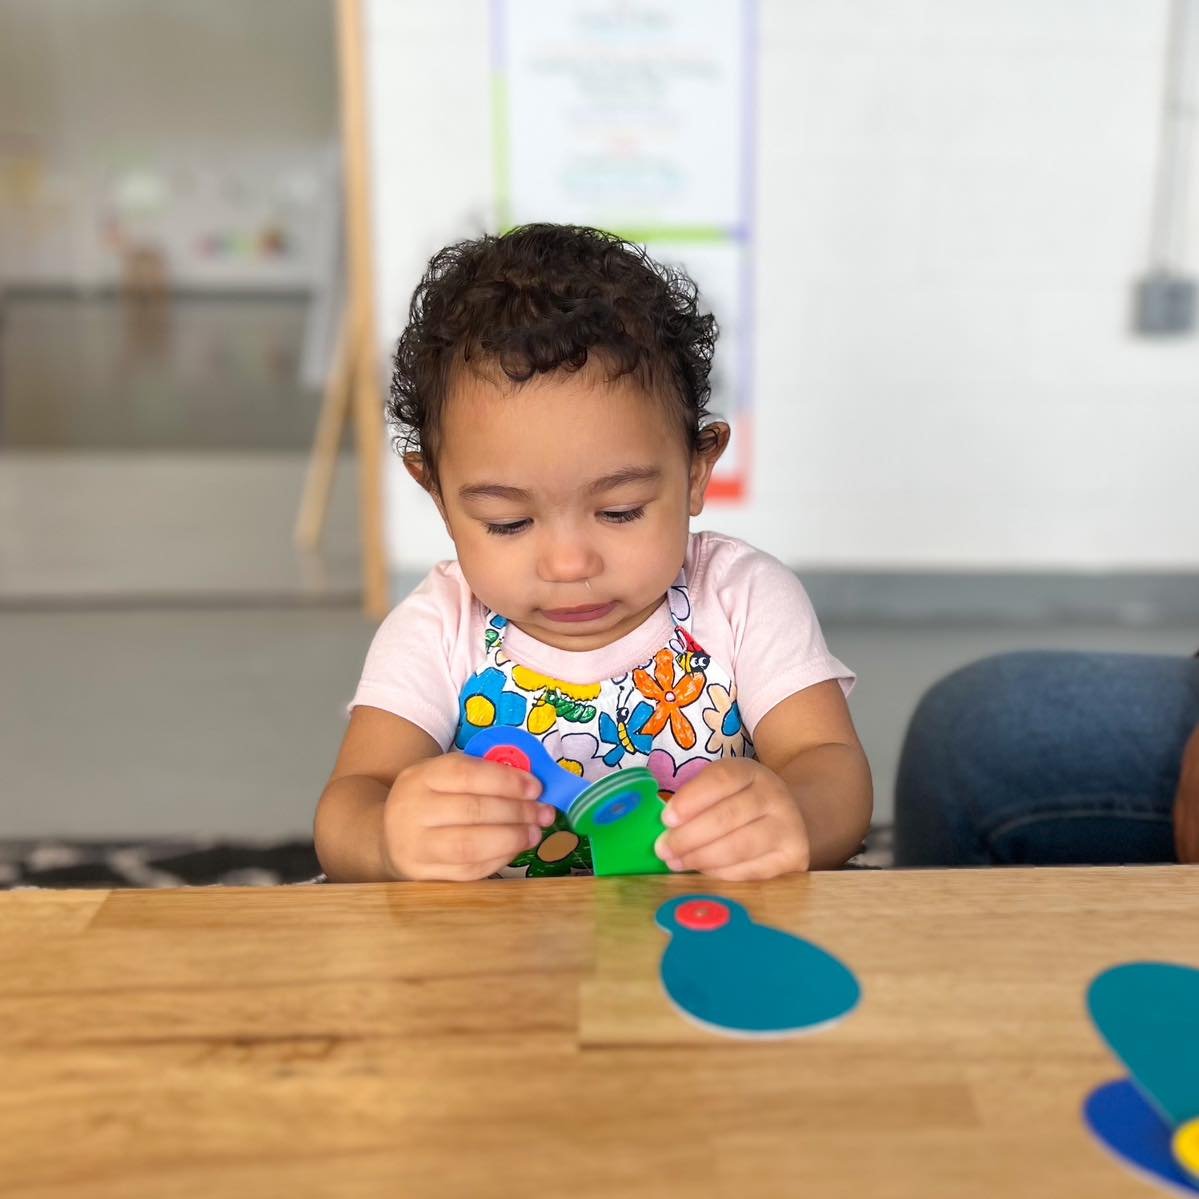 Always fun playing and learning with Clixo Magnets ! 
.
.
#DiscoverWCM
#WestchesterChildrensMuseum
#WestchesterFamily
#WestchesterKids
#StemEducation
#PlayToLearn
#ImaginationIsKey
#UseYourImagination
#ThingsToDoInWestchester
#WestchesterActivities 
